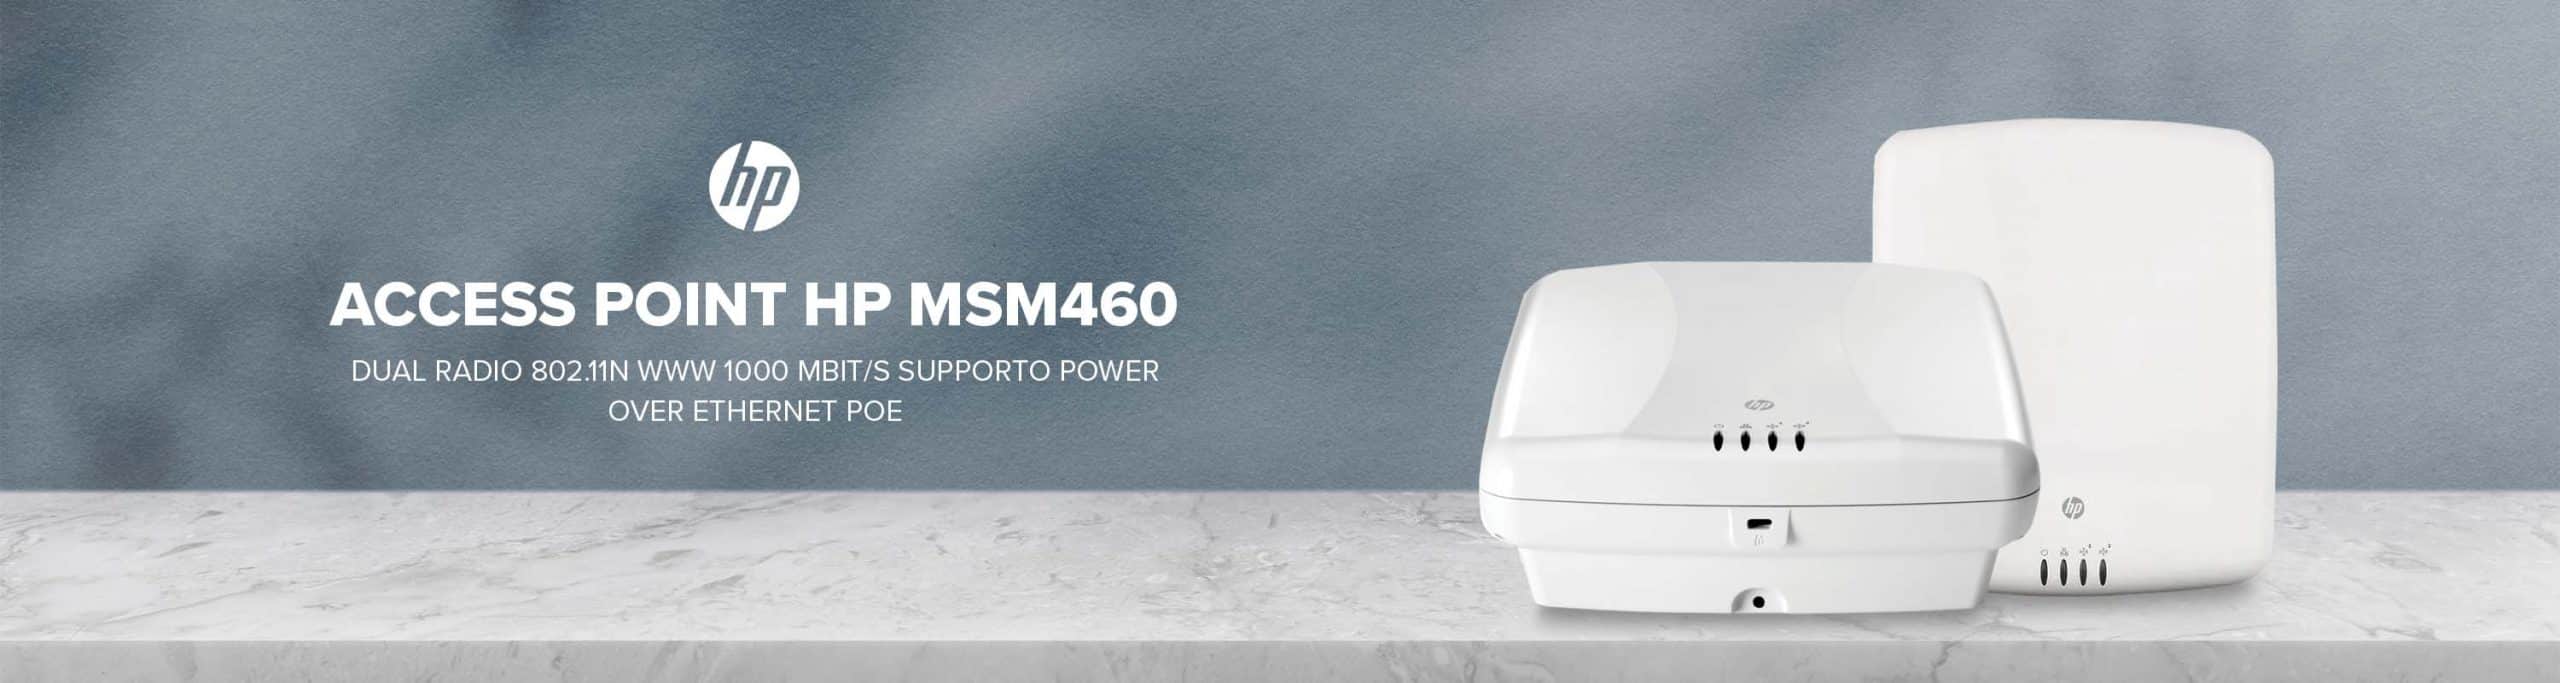 HP MSM460 Access Point